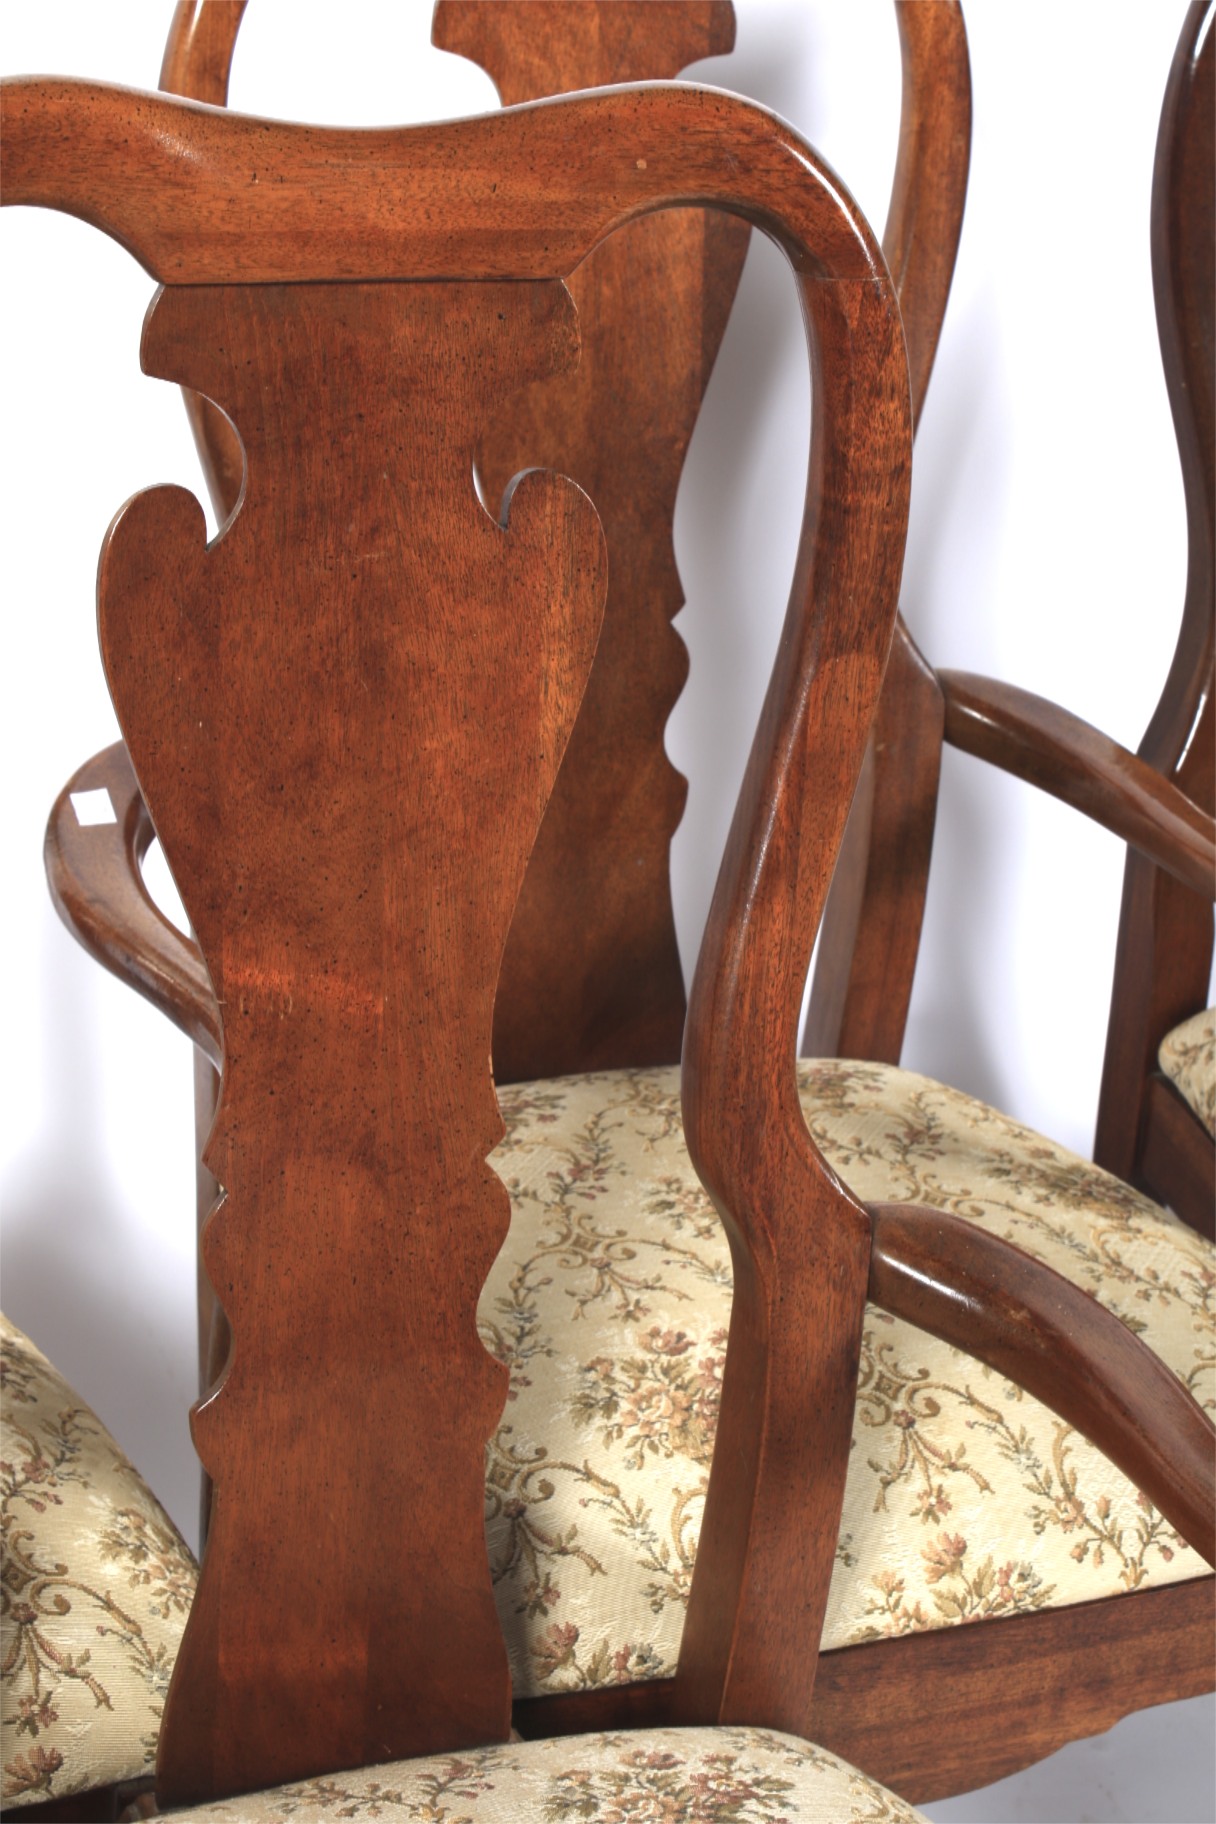 A 20th century elm wake drop leaf table and chairs. - Image 3 of 5